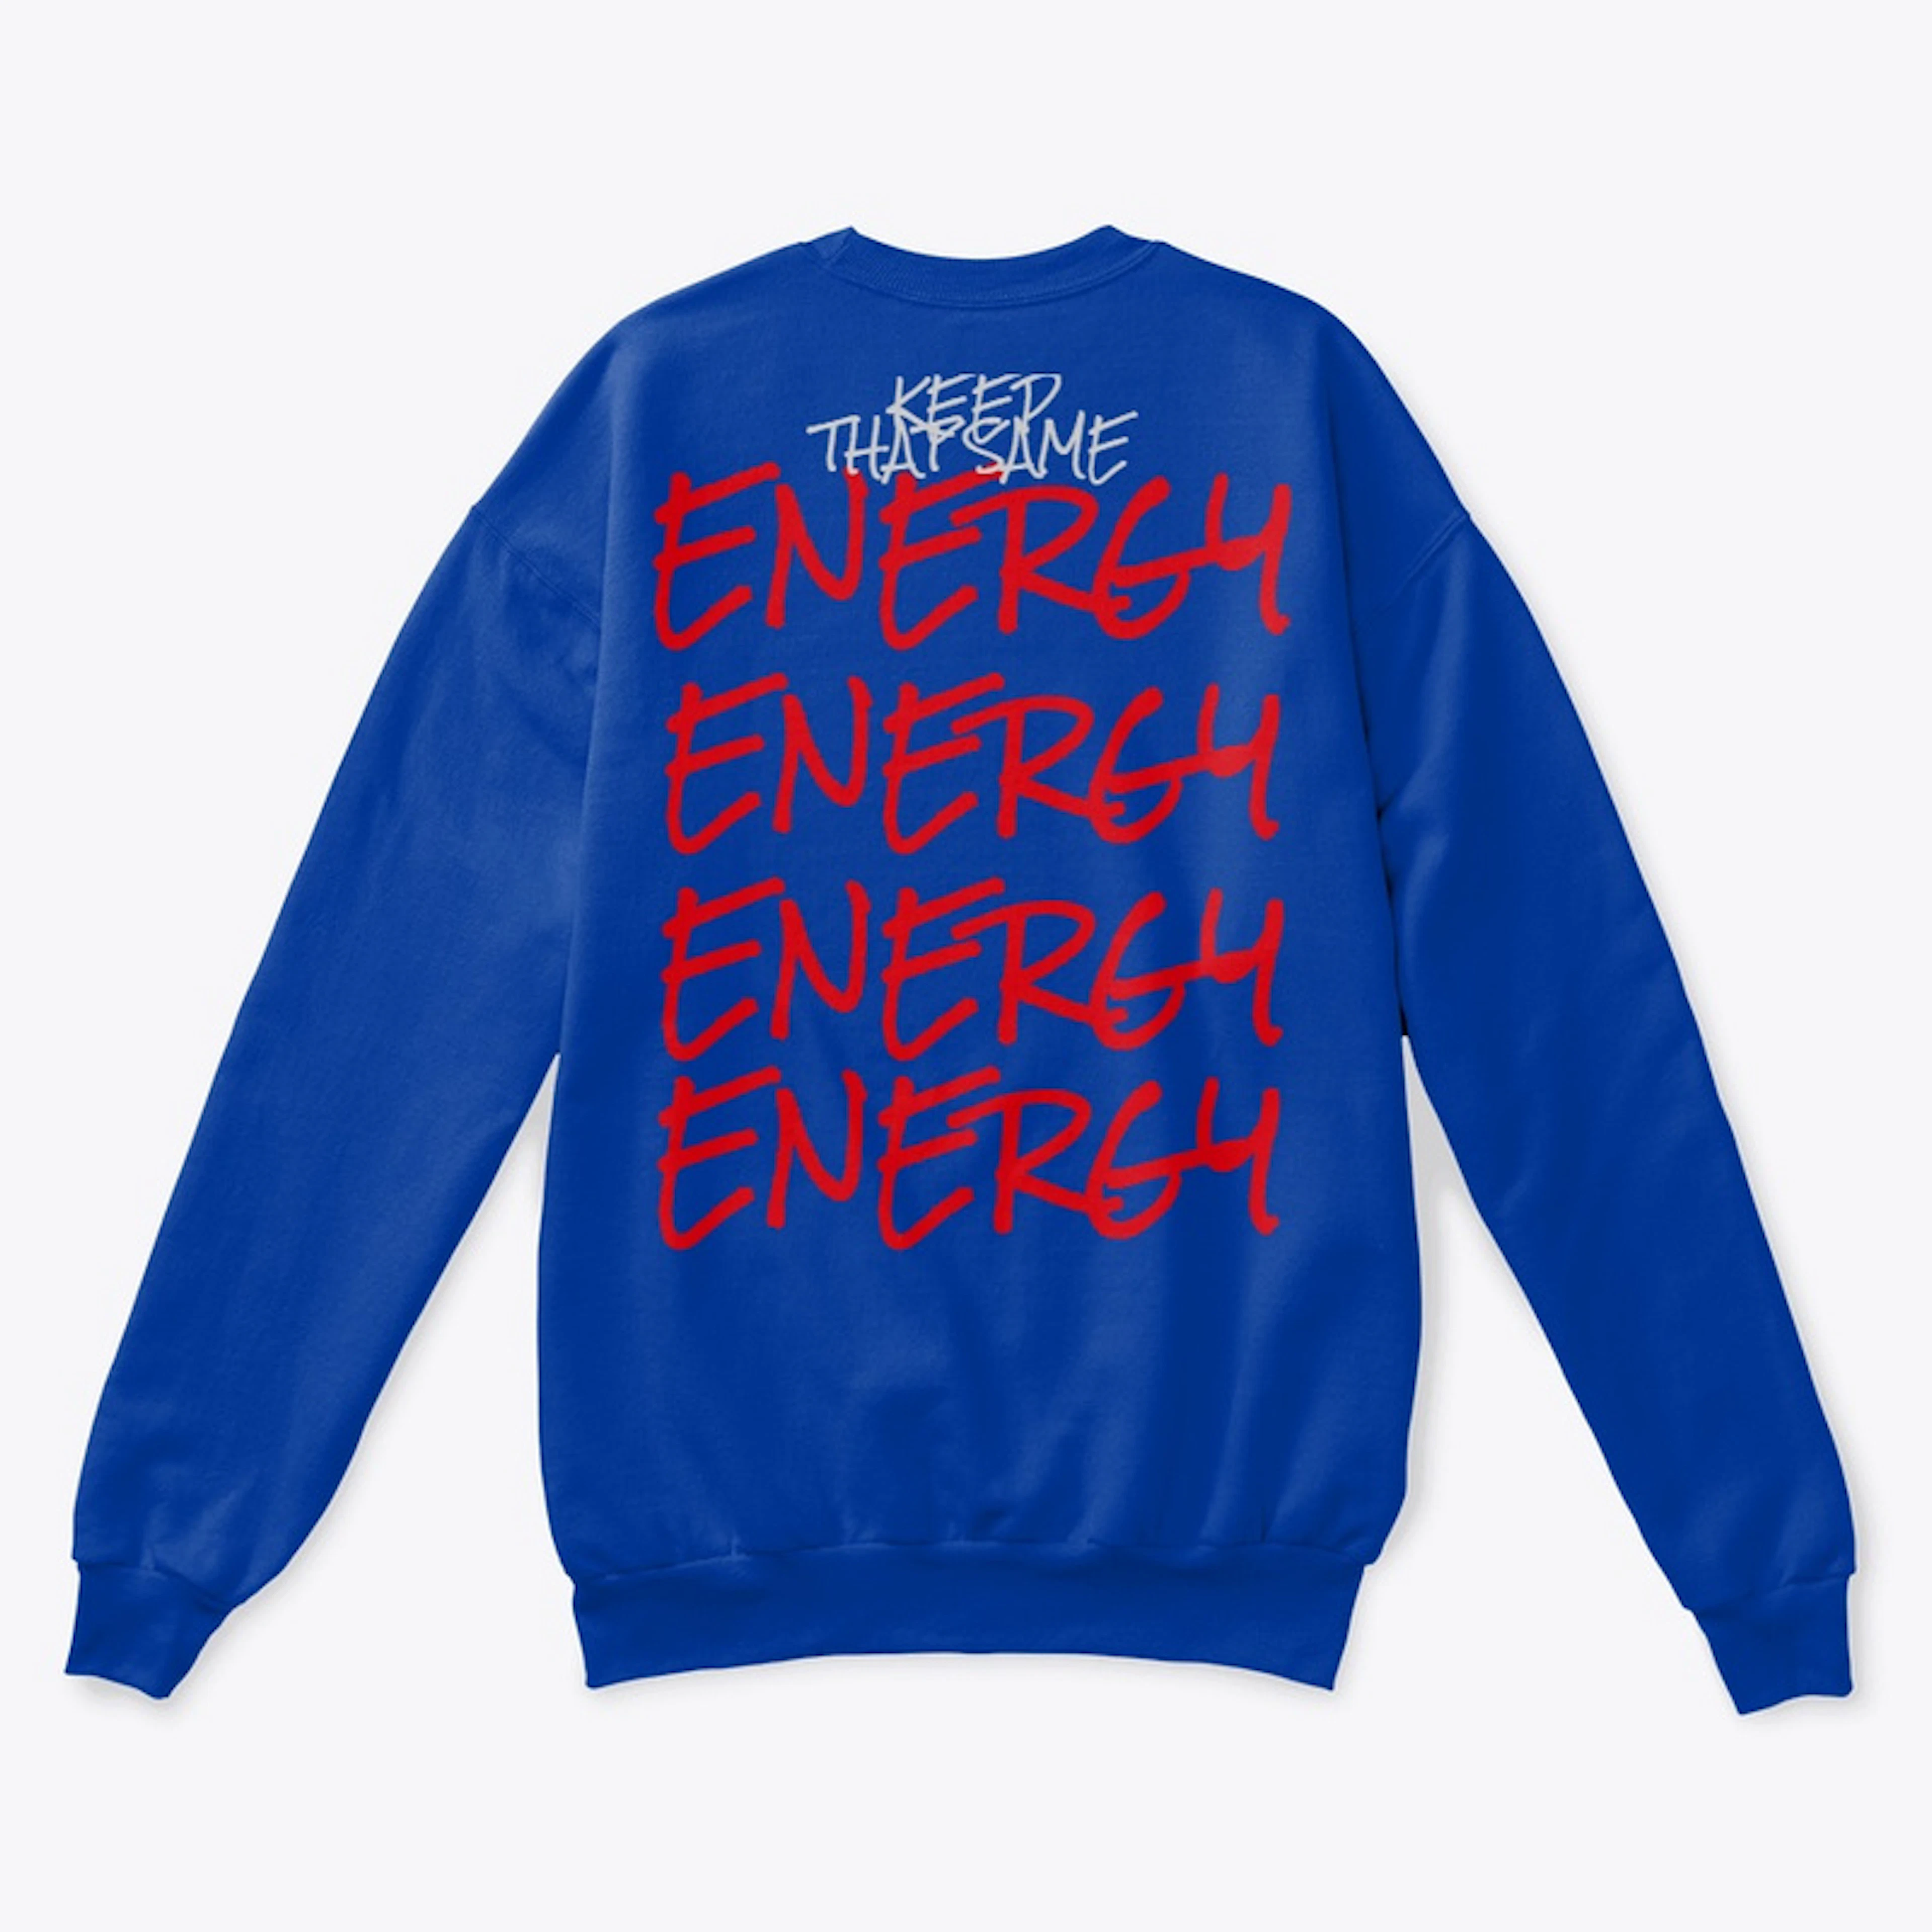 Keep That Same Energy (various colors)